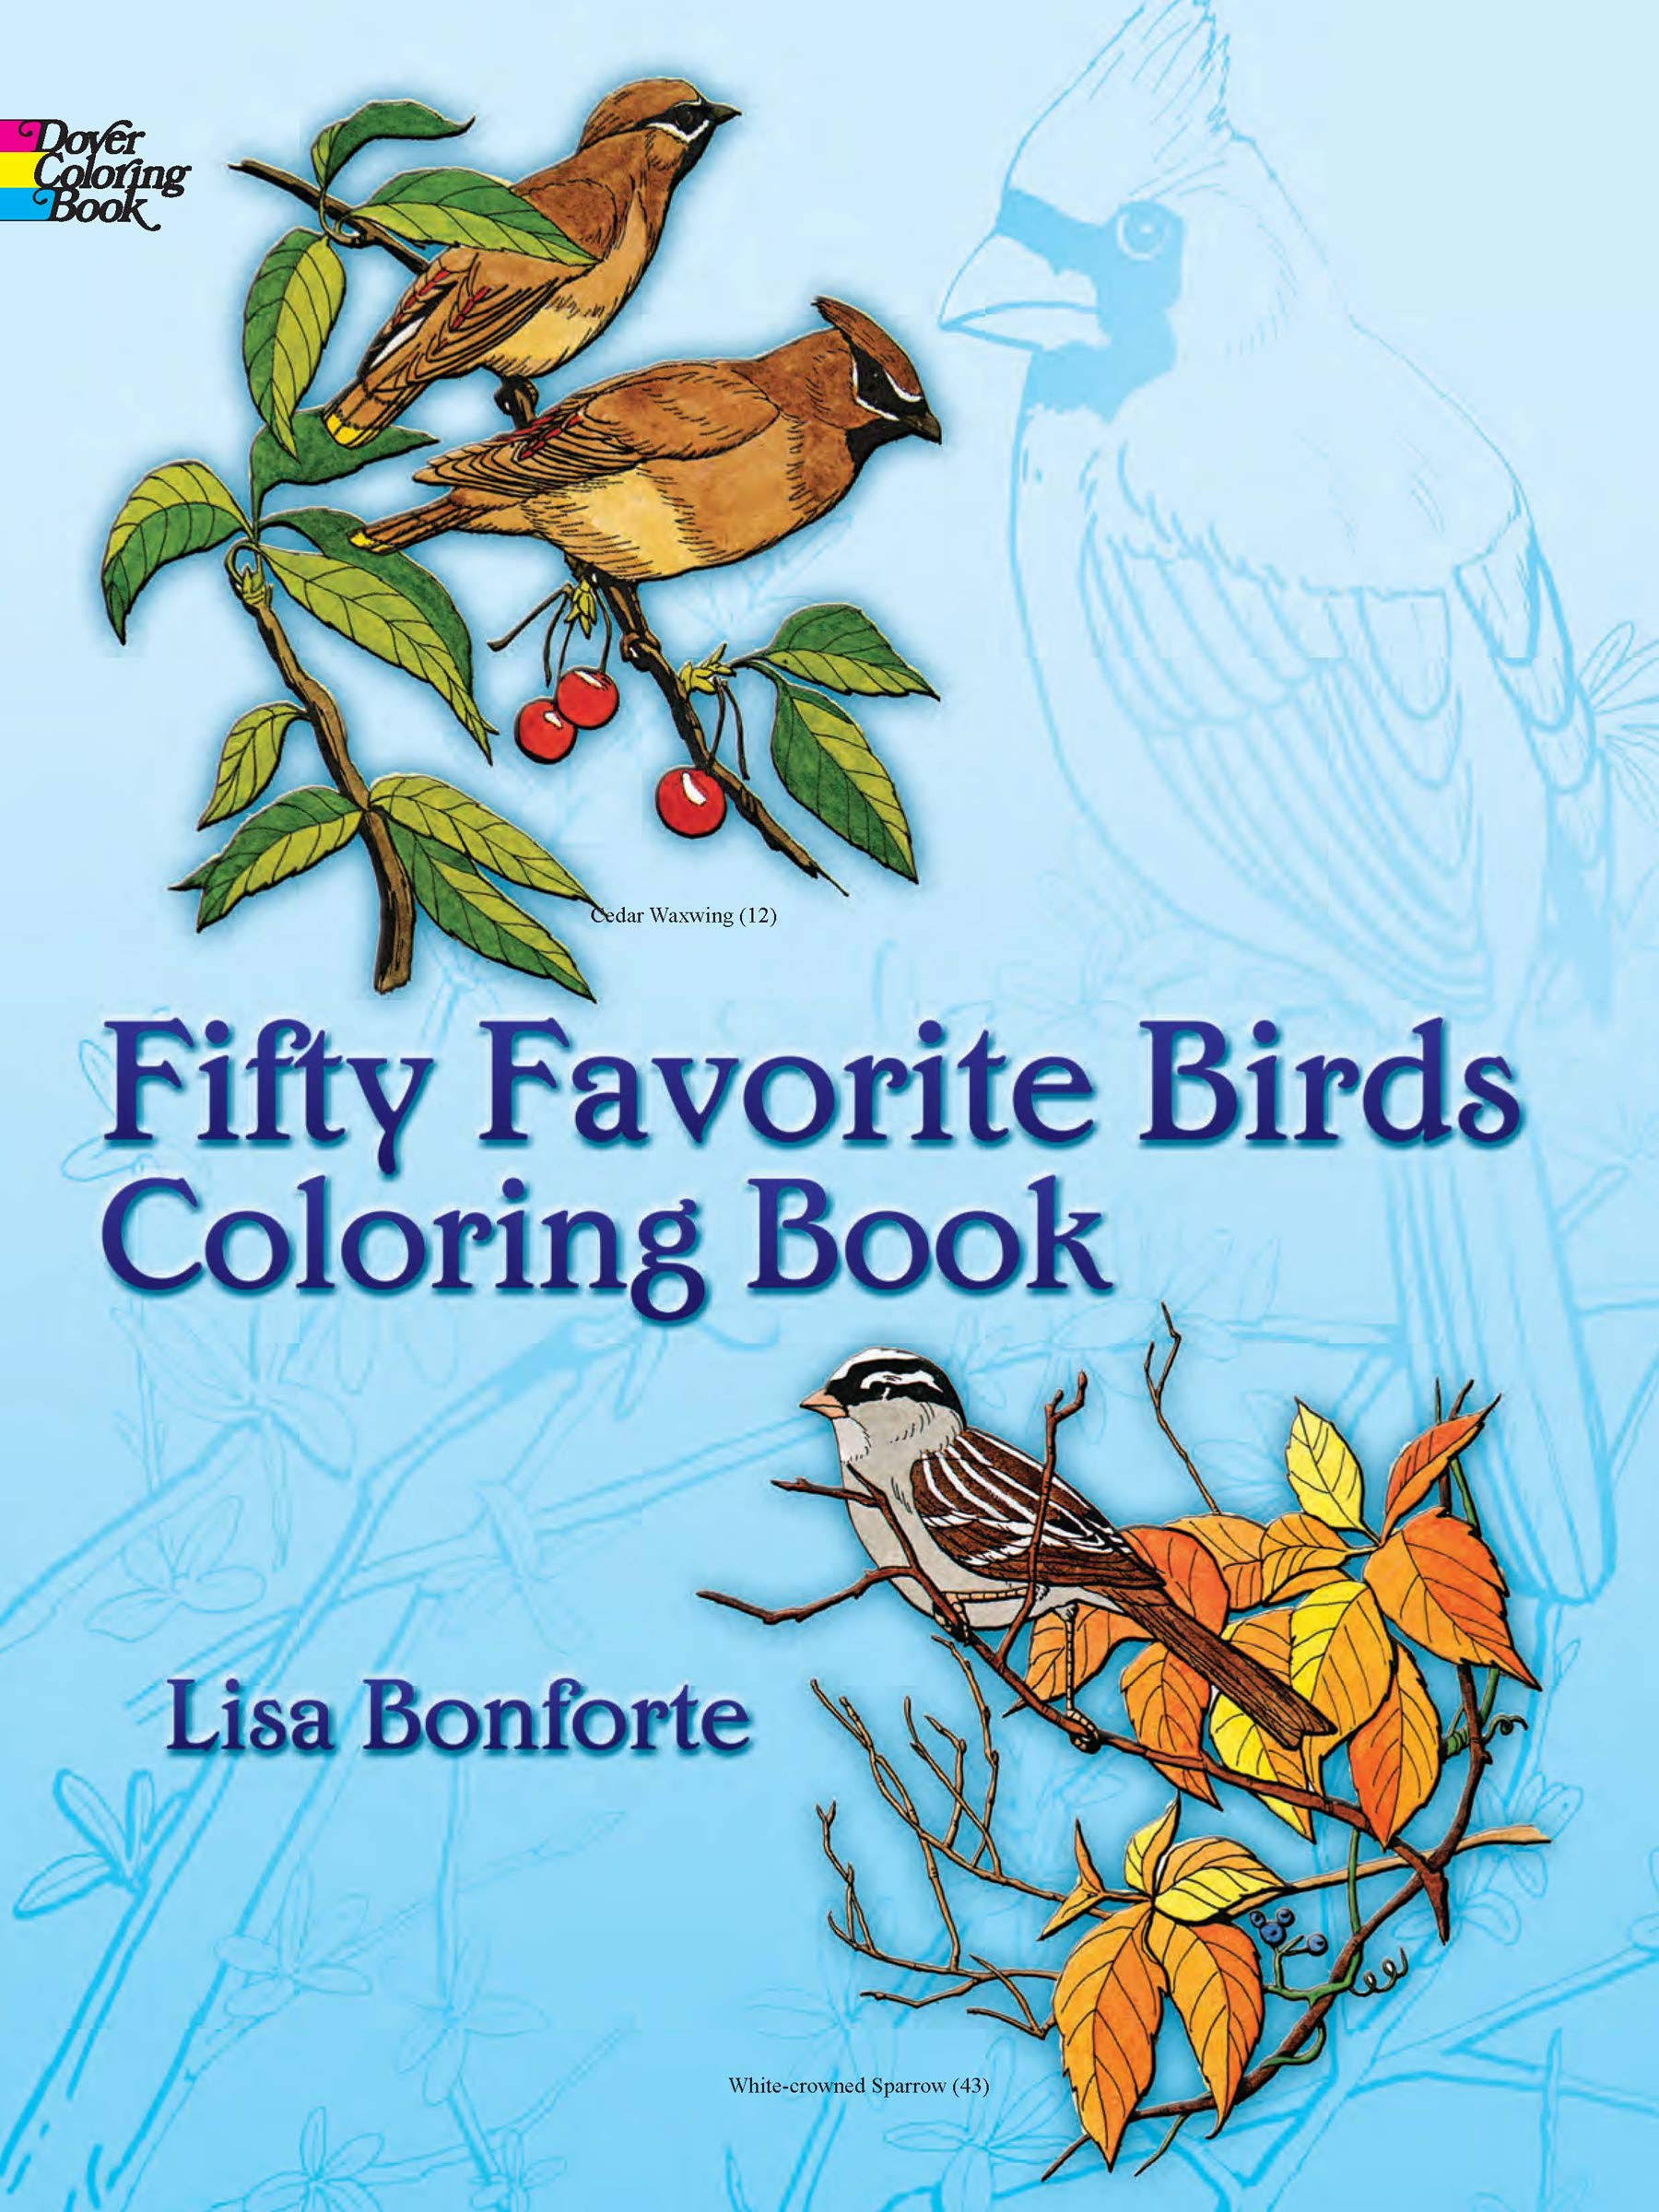 Fifty Favorite Birds Coloring Book [Book]